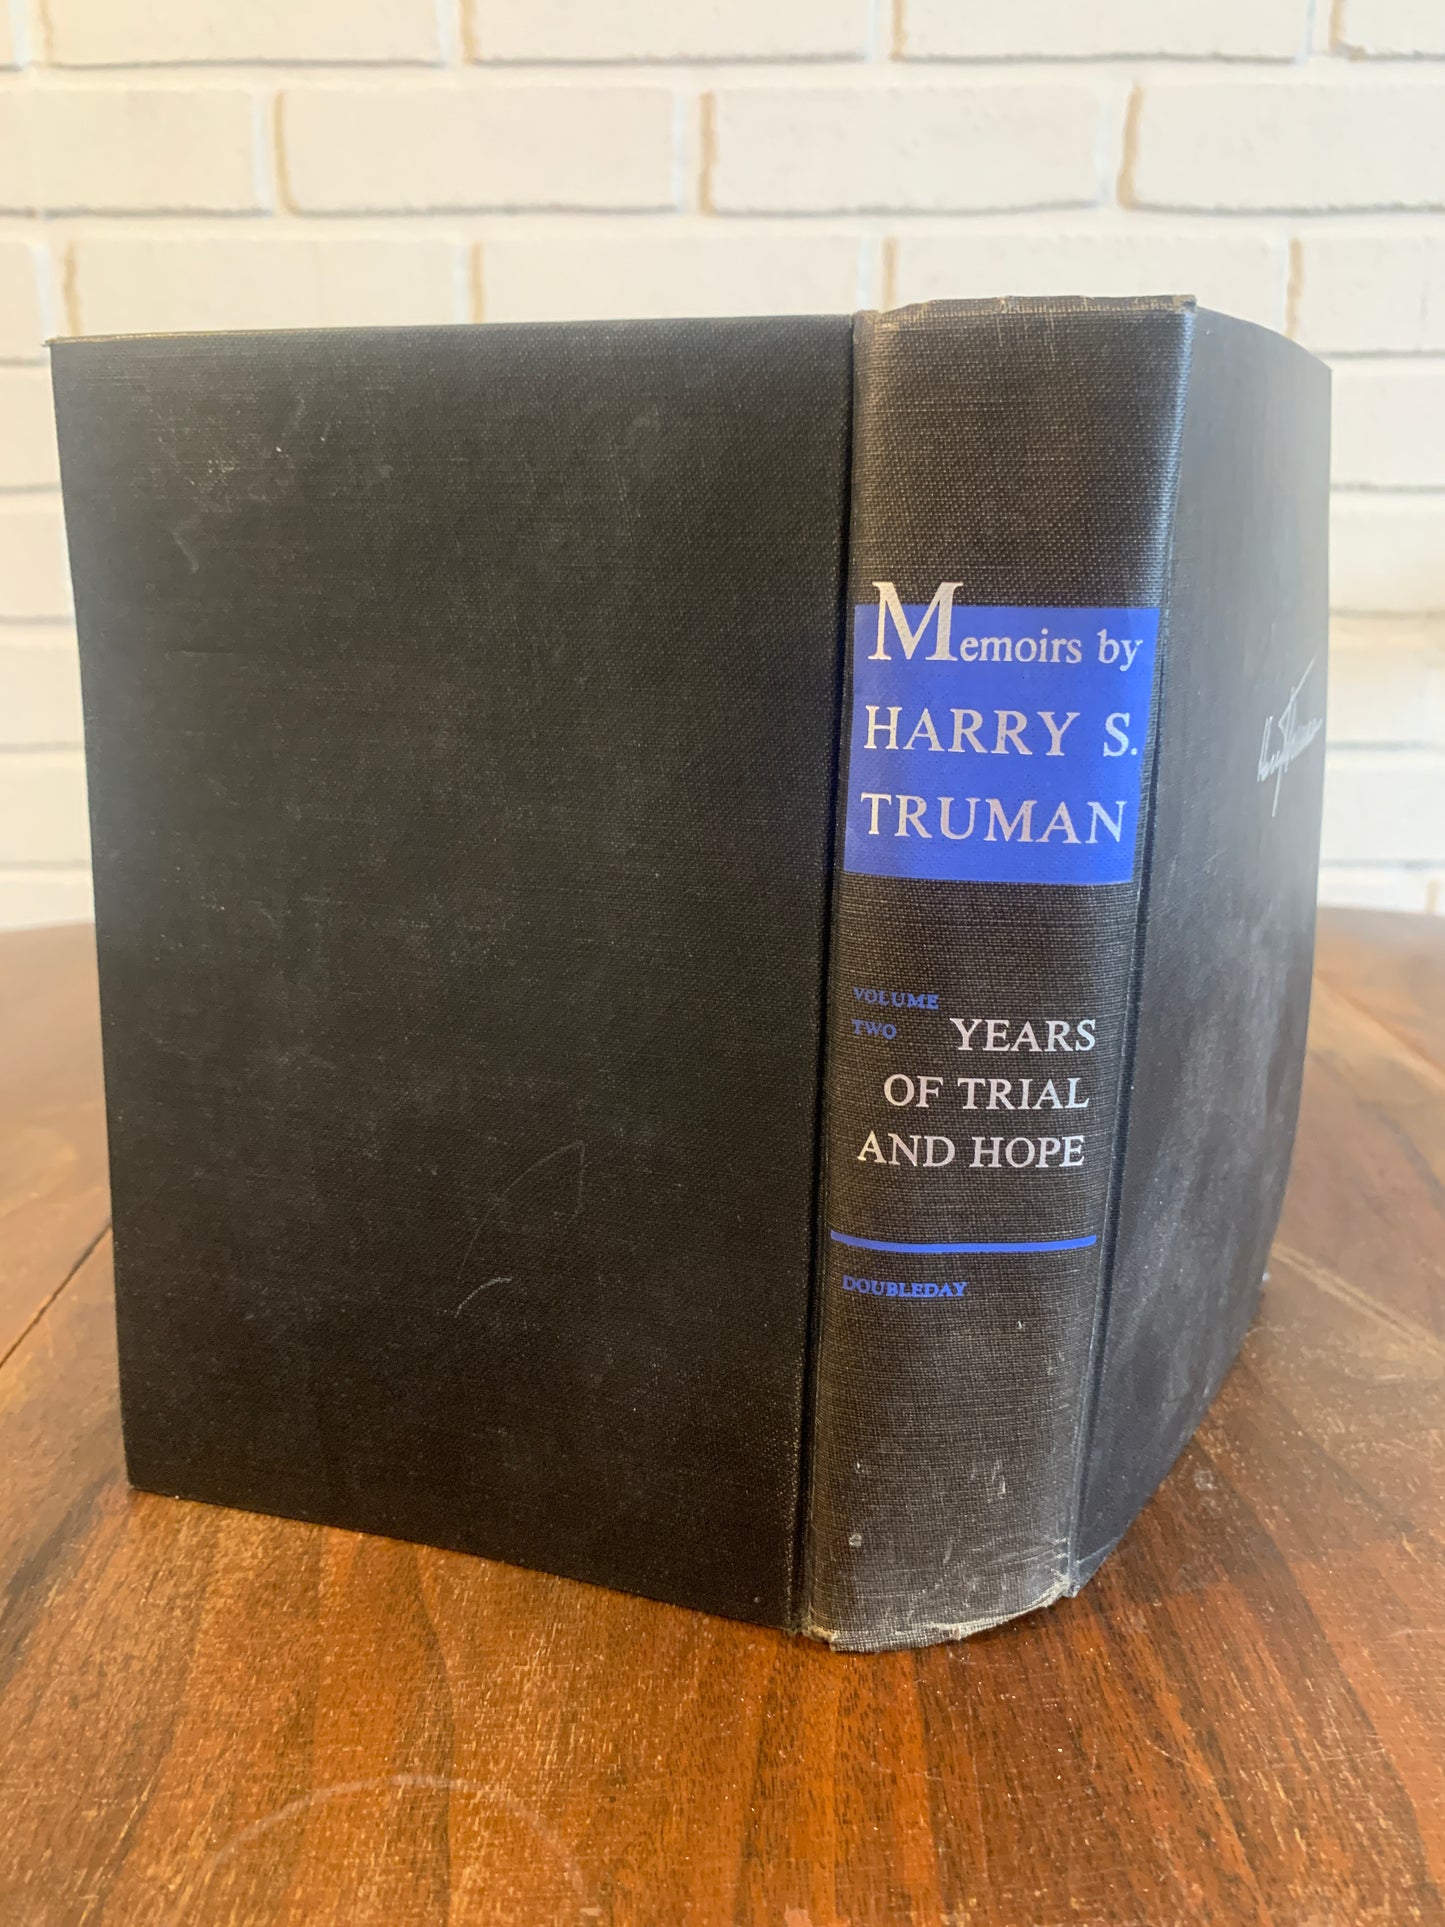 Memoirs by Harry S. Truman - Vol. 2 Years of Trial and Hope